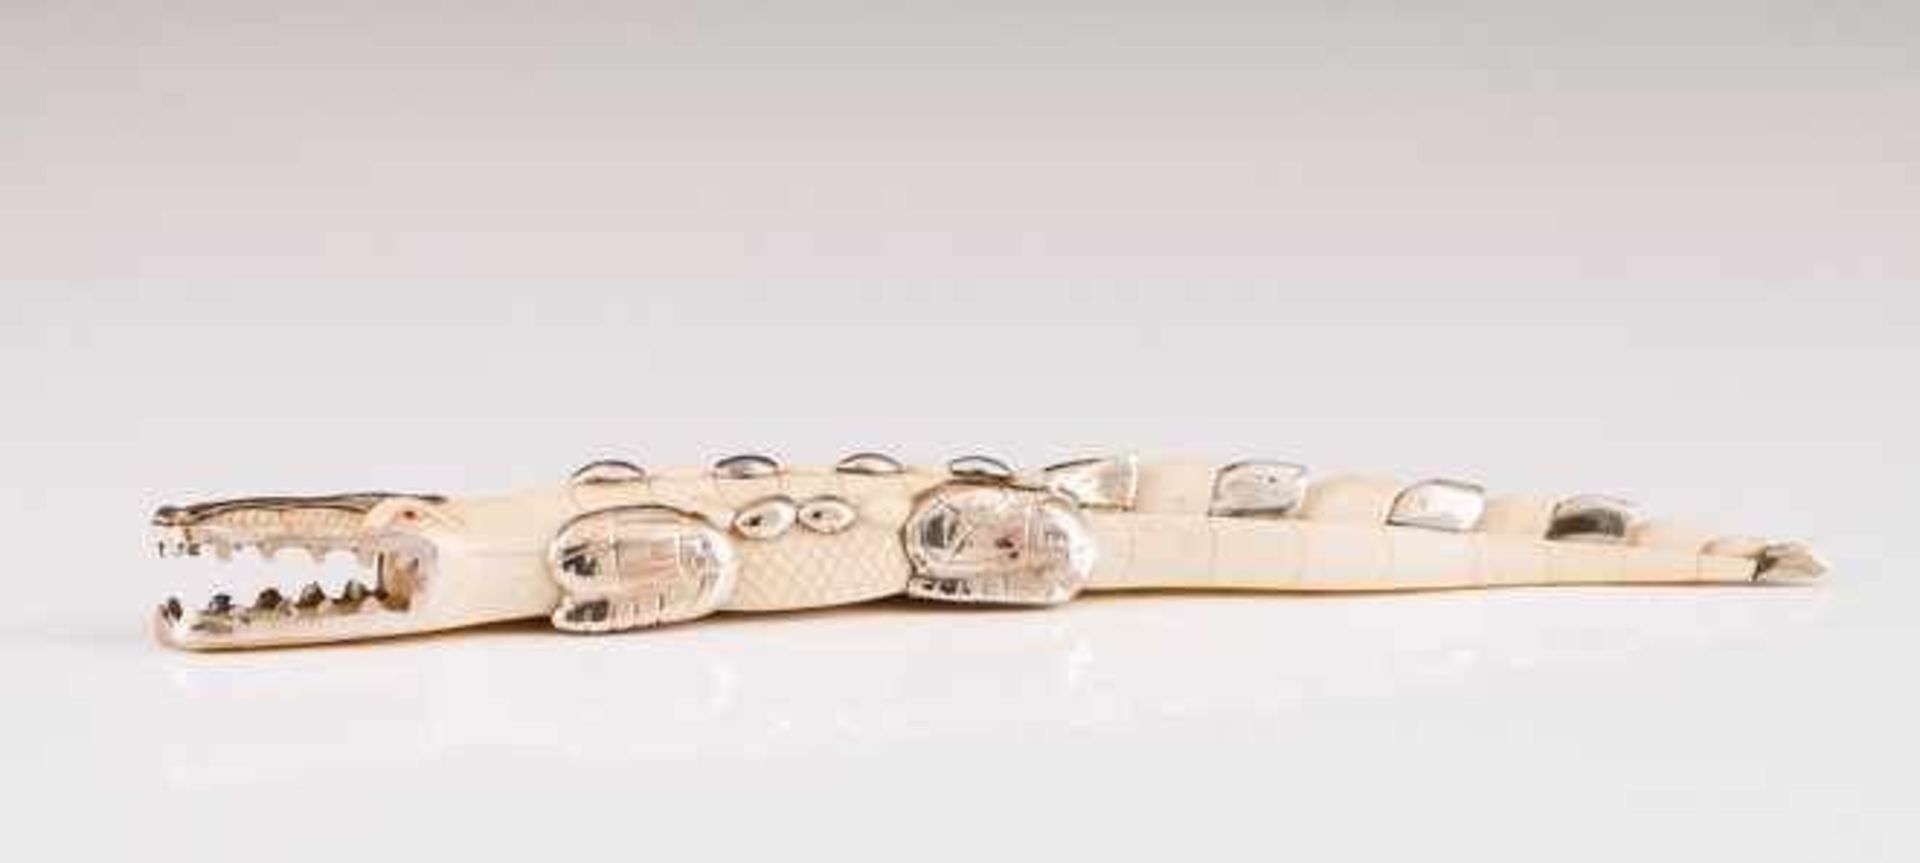 A crocodile, LUIZ FERREIRA A carved ivory and silver sculpture Porto assay mark (after 1985),